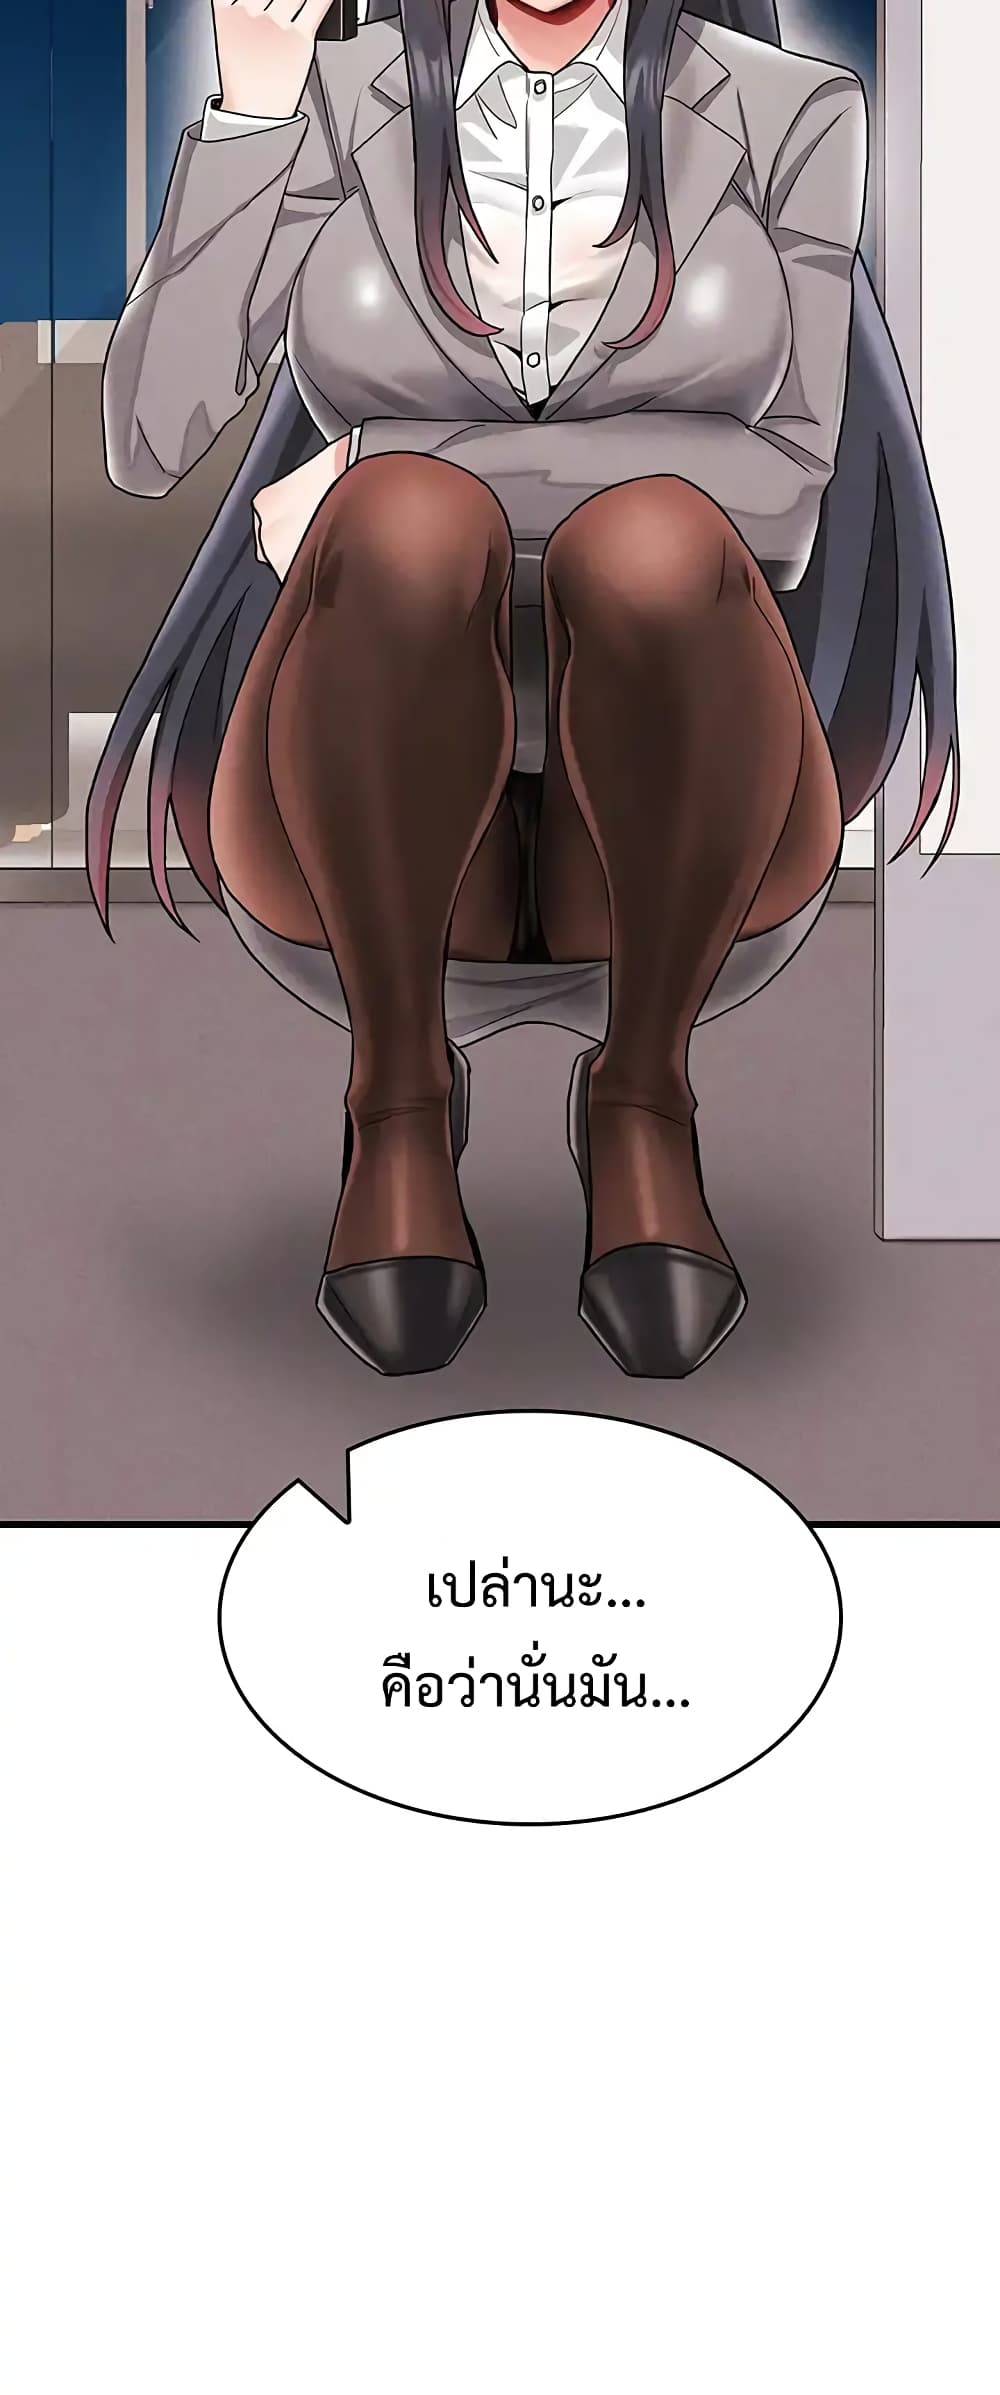 Relationship Reverse Button: Let’s Make Her Submissive 1 ภาพที่ 33